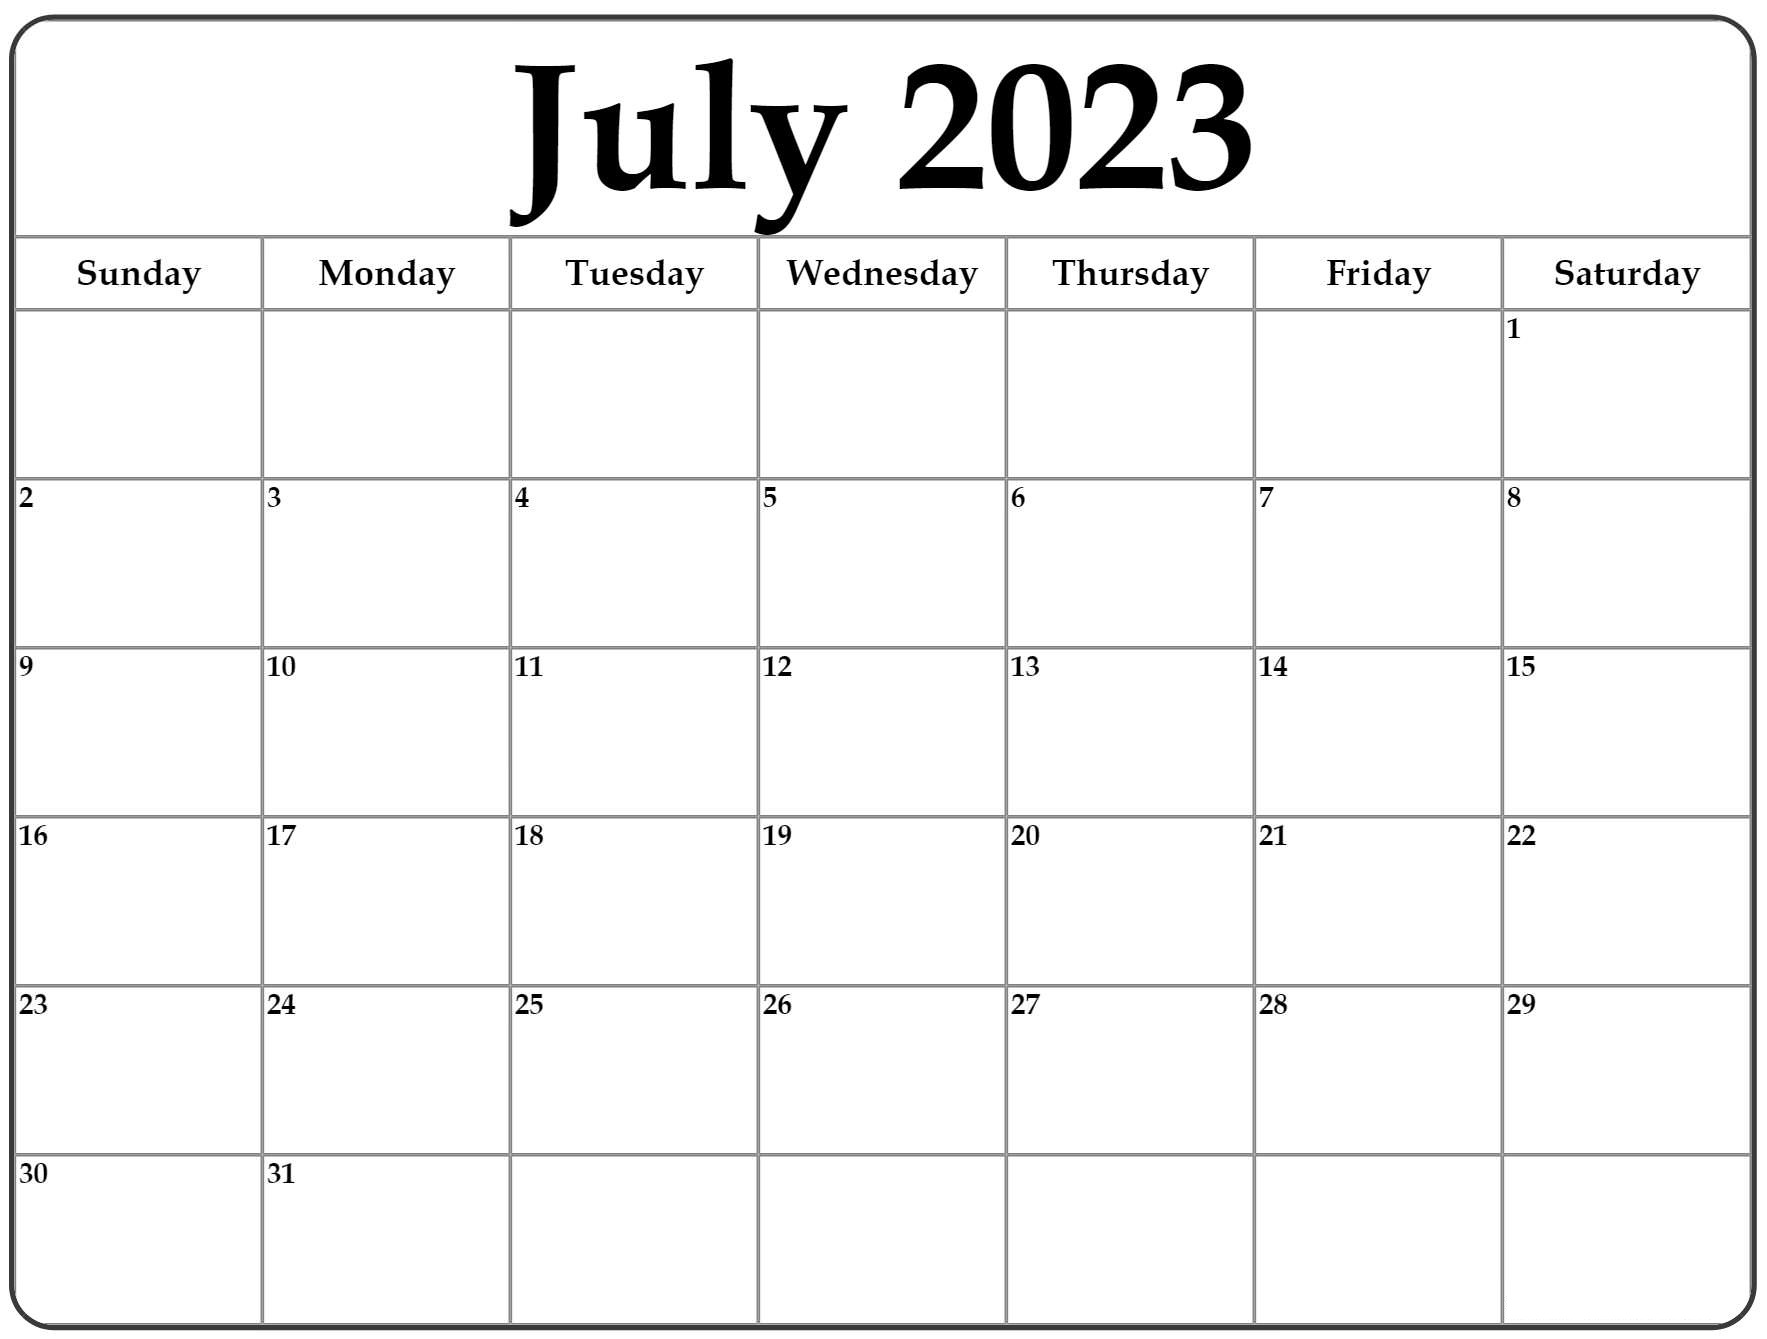 July 2023 Calendar Blank Templates with Notes